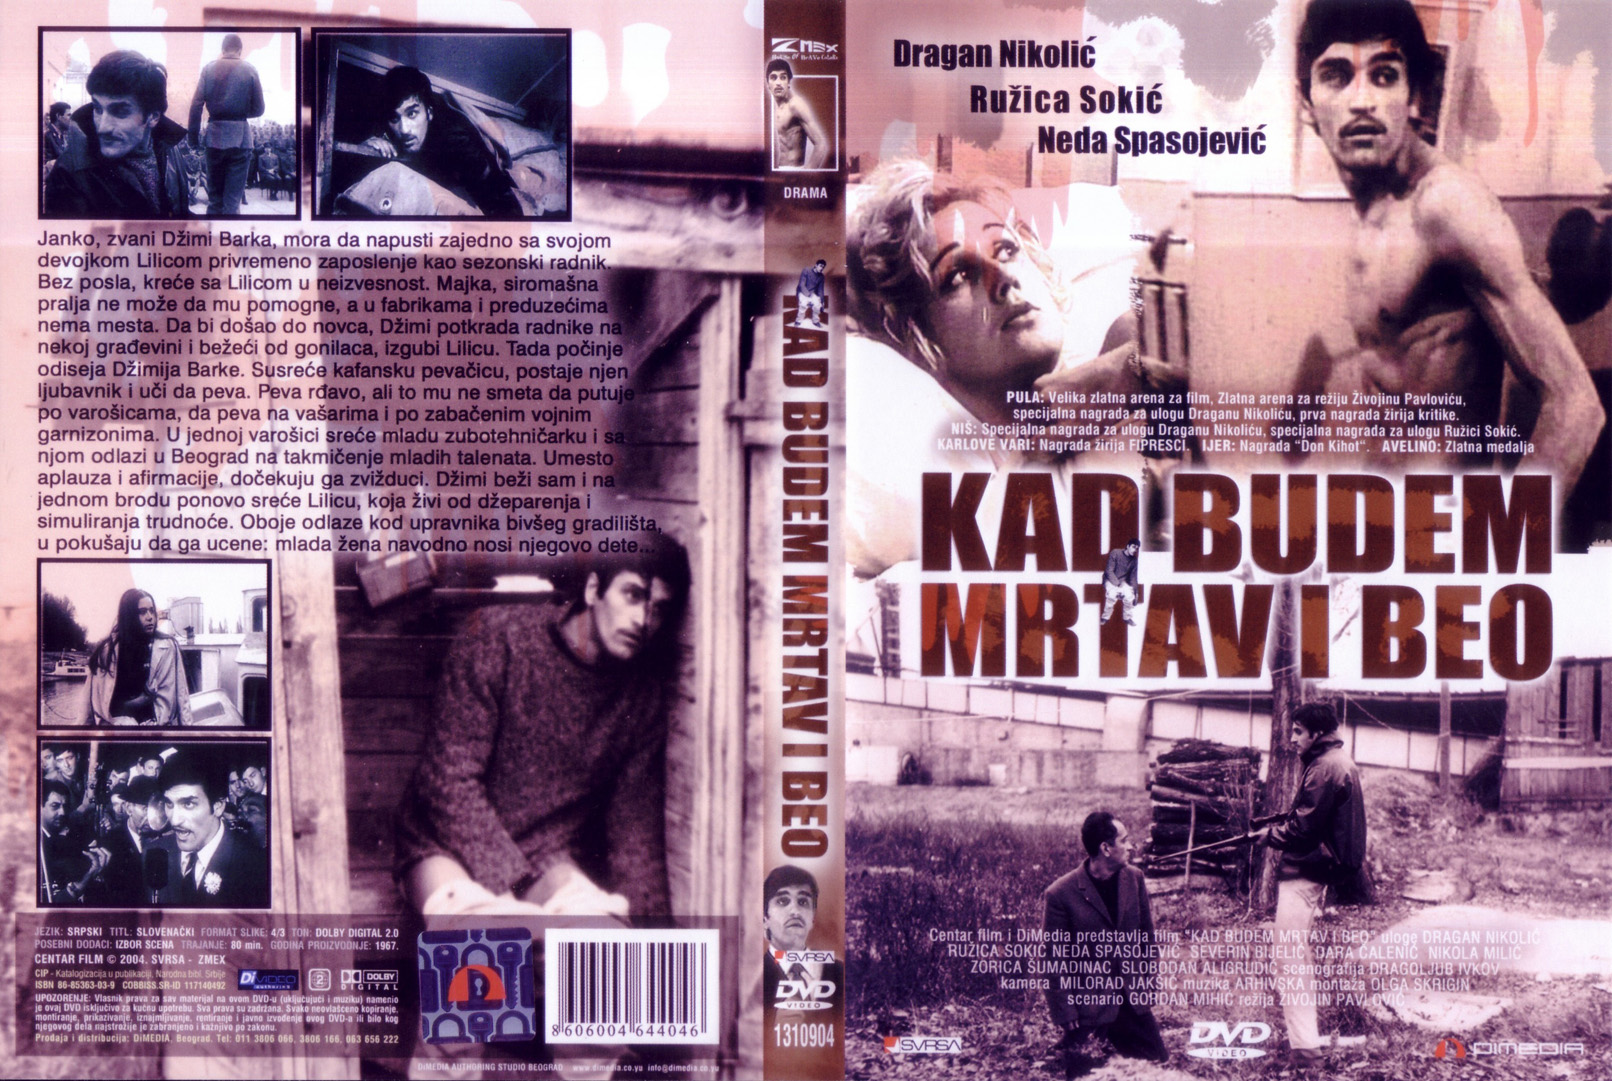 Click to view full size image -  DVD Cover - K - kad_budem_mrtav_i_beo_dvd - kad_budem_mrtav_i_beo_dvd.jpg